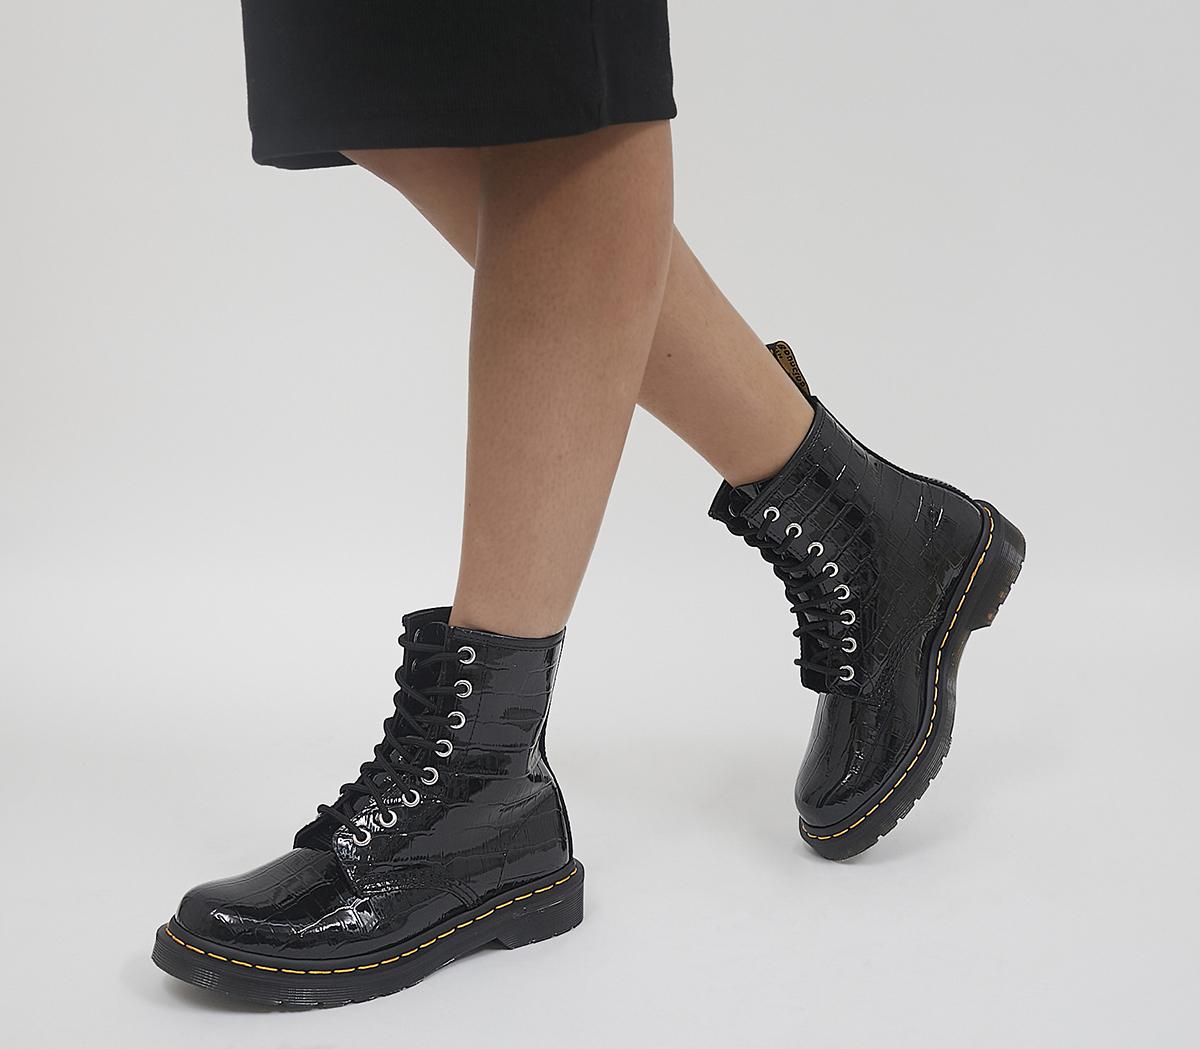 8 Eyelet Lace Up Boots